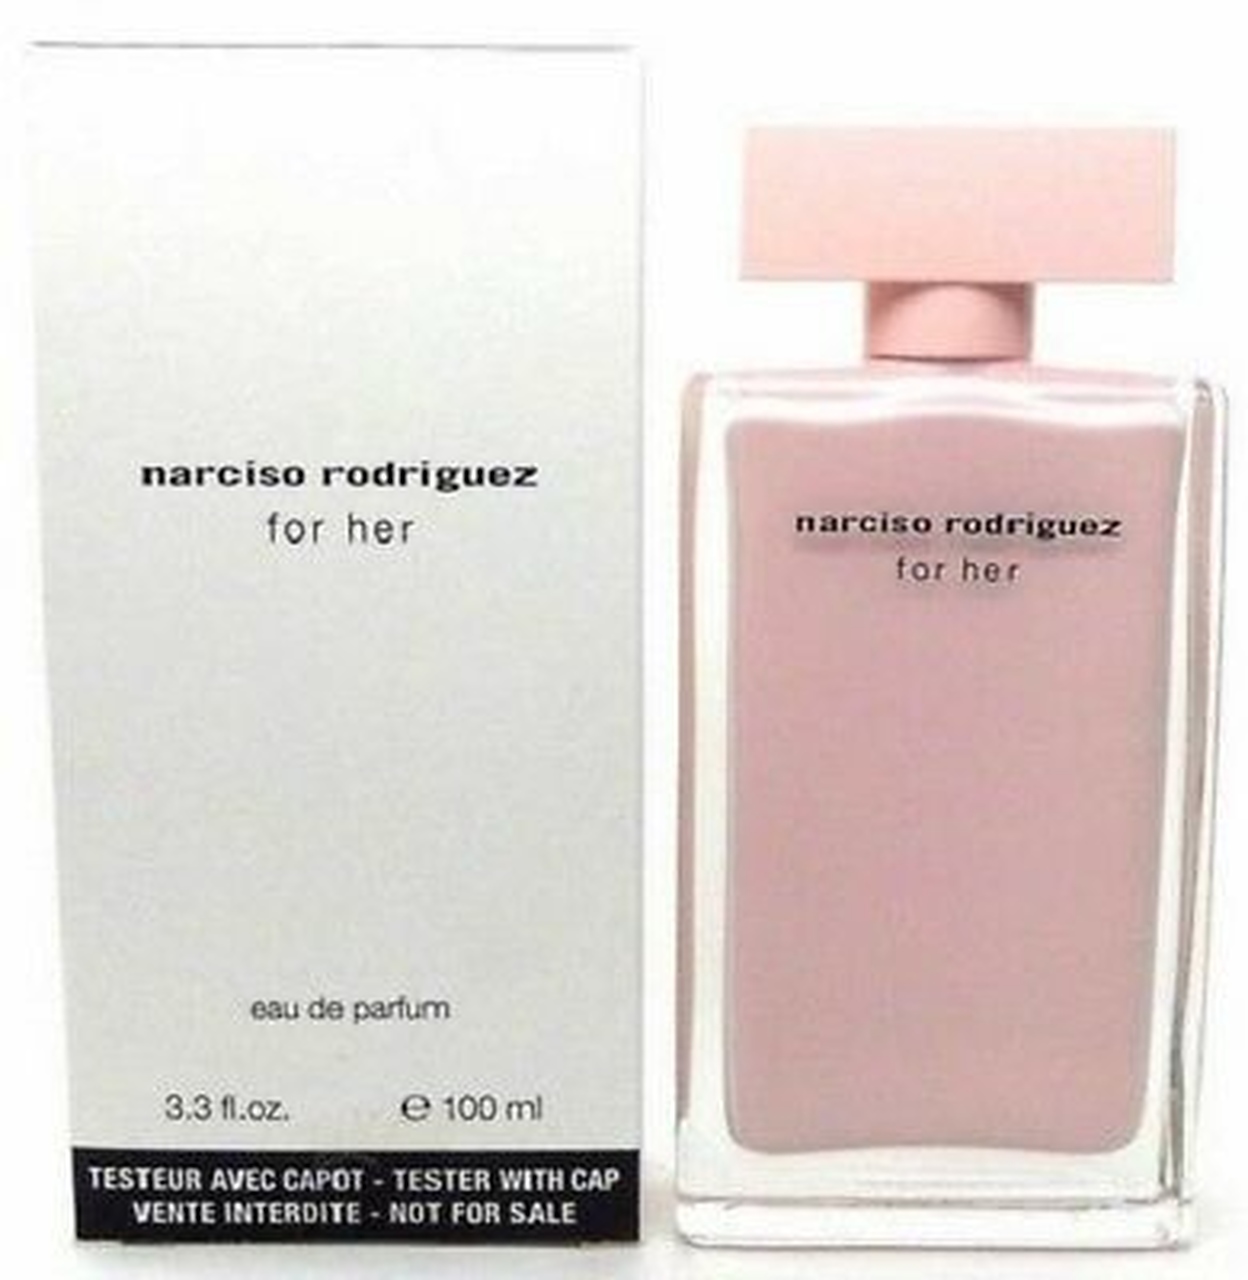 All of me narciso rodriguez. Narciso Rodriguez for her Eau de Parfum. Narciso Rodriguez for her EDP 100ml. Narciso Rodriguez for her EDP woman 100ml Tester. Narciso Rodriguez for her Eau de Parfum Narciso Rodriguez.